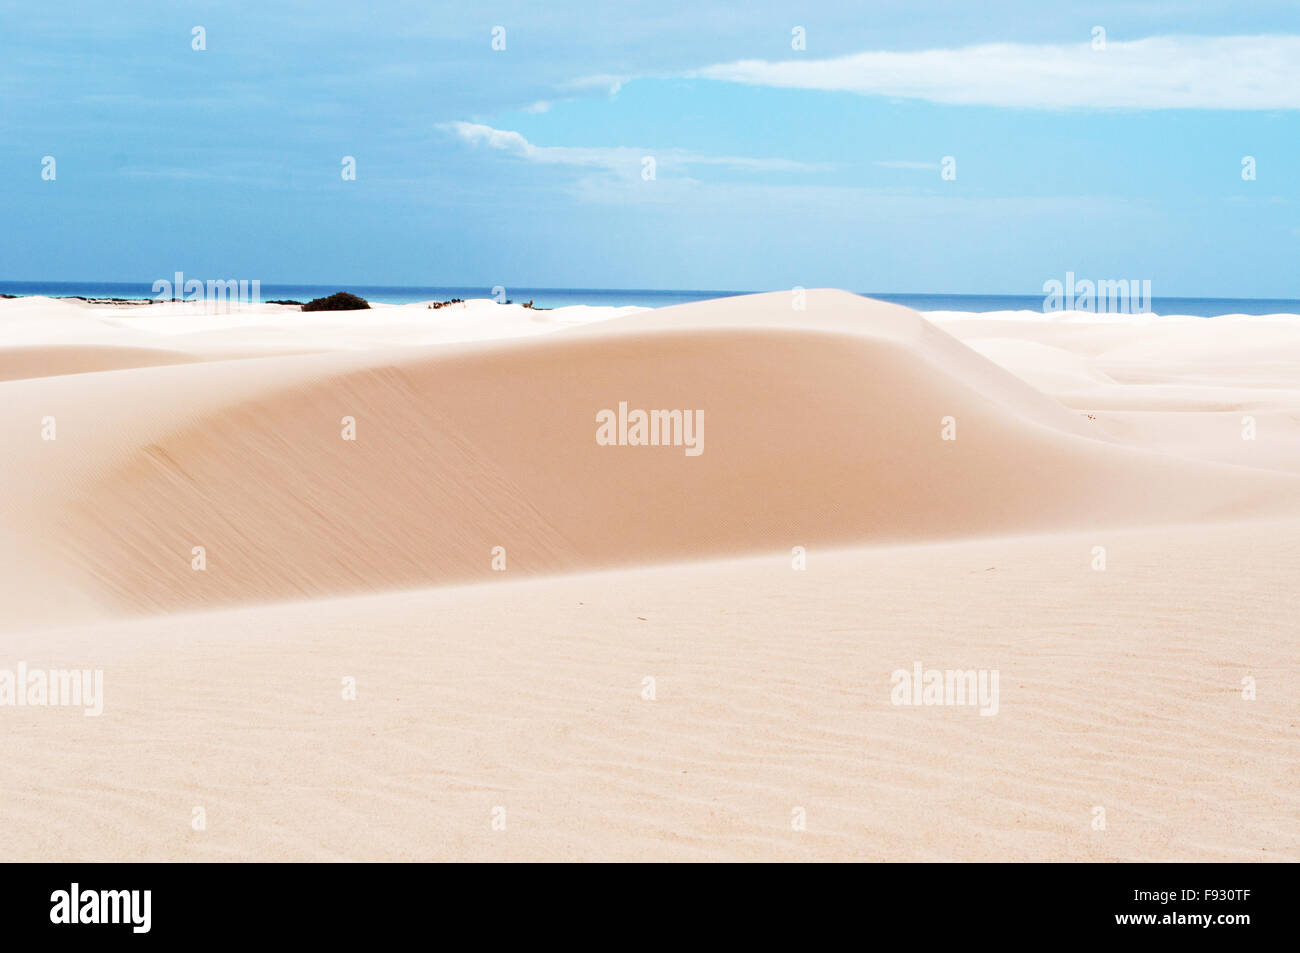 Socotra, Yemen, Middle East: the Arabian Sea at the end of the sand dunes of Stero, Aomak beach, protected area, 4x4 excursion, desert Stock Photo